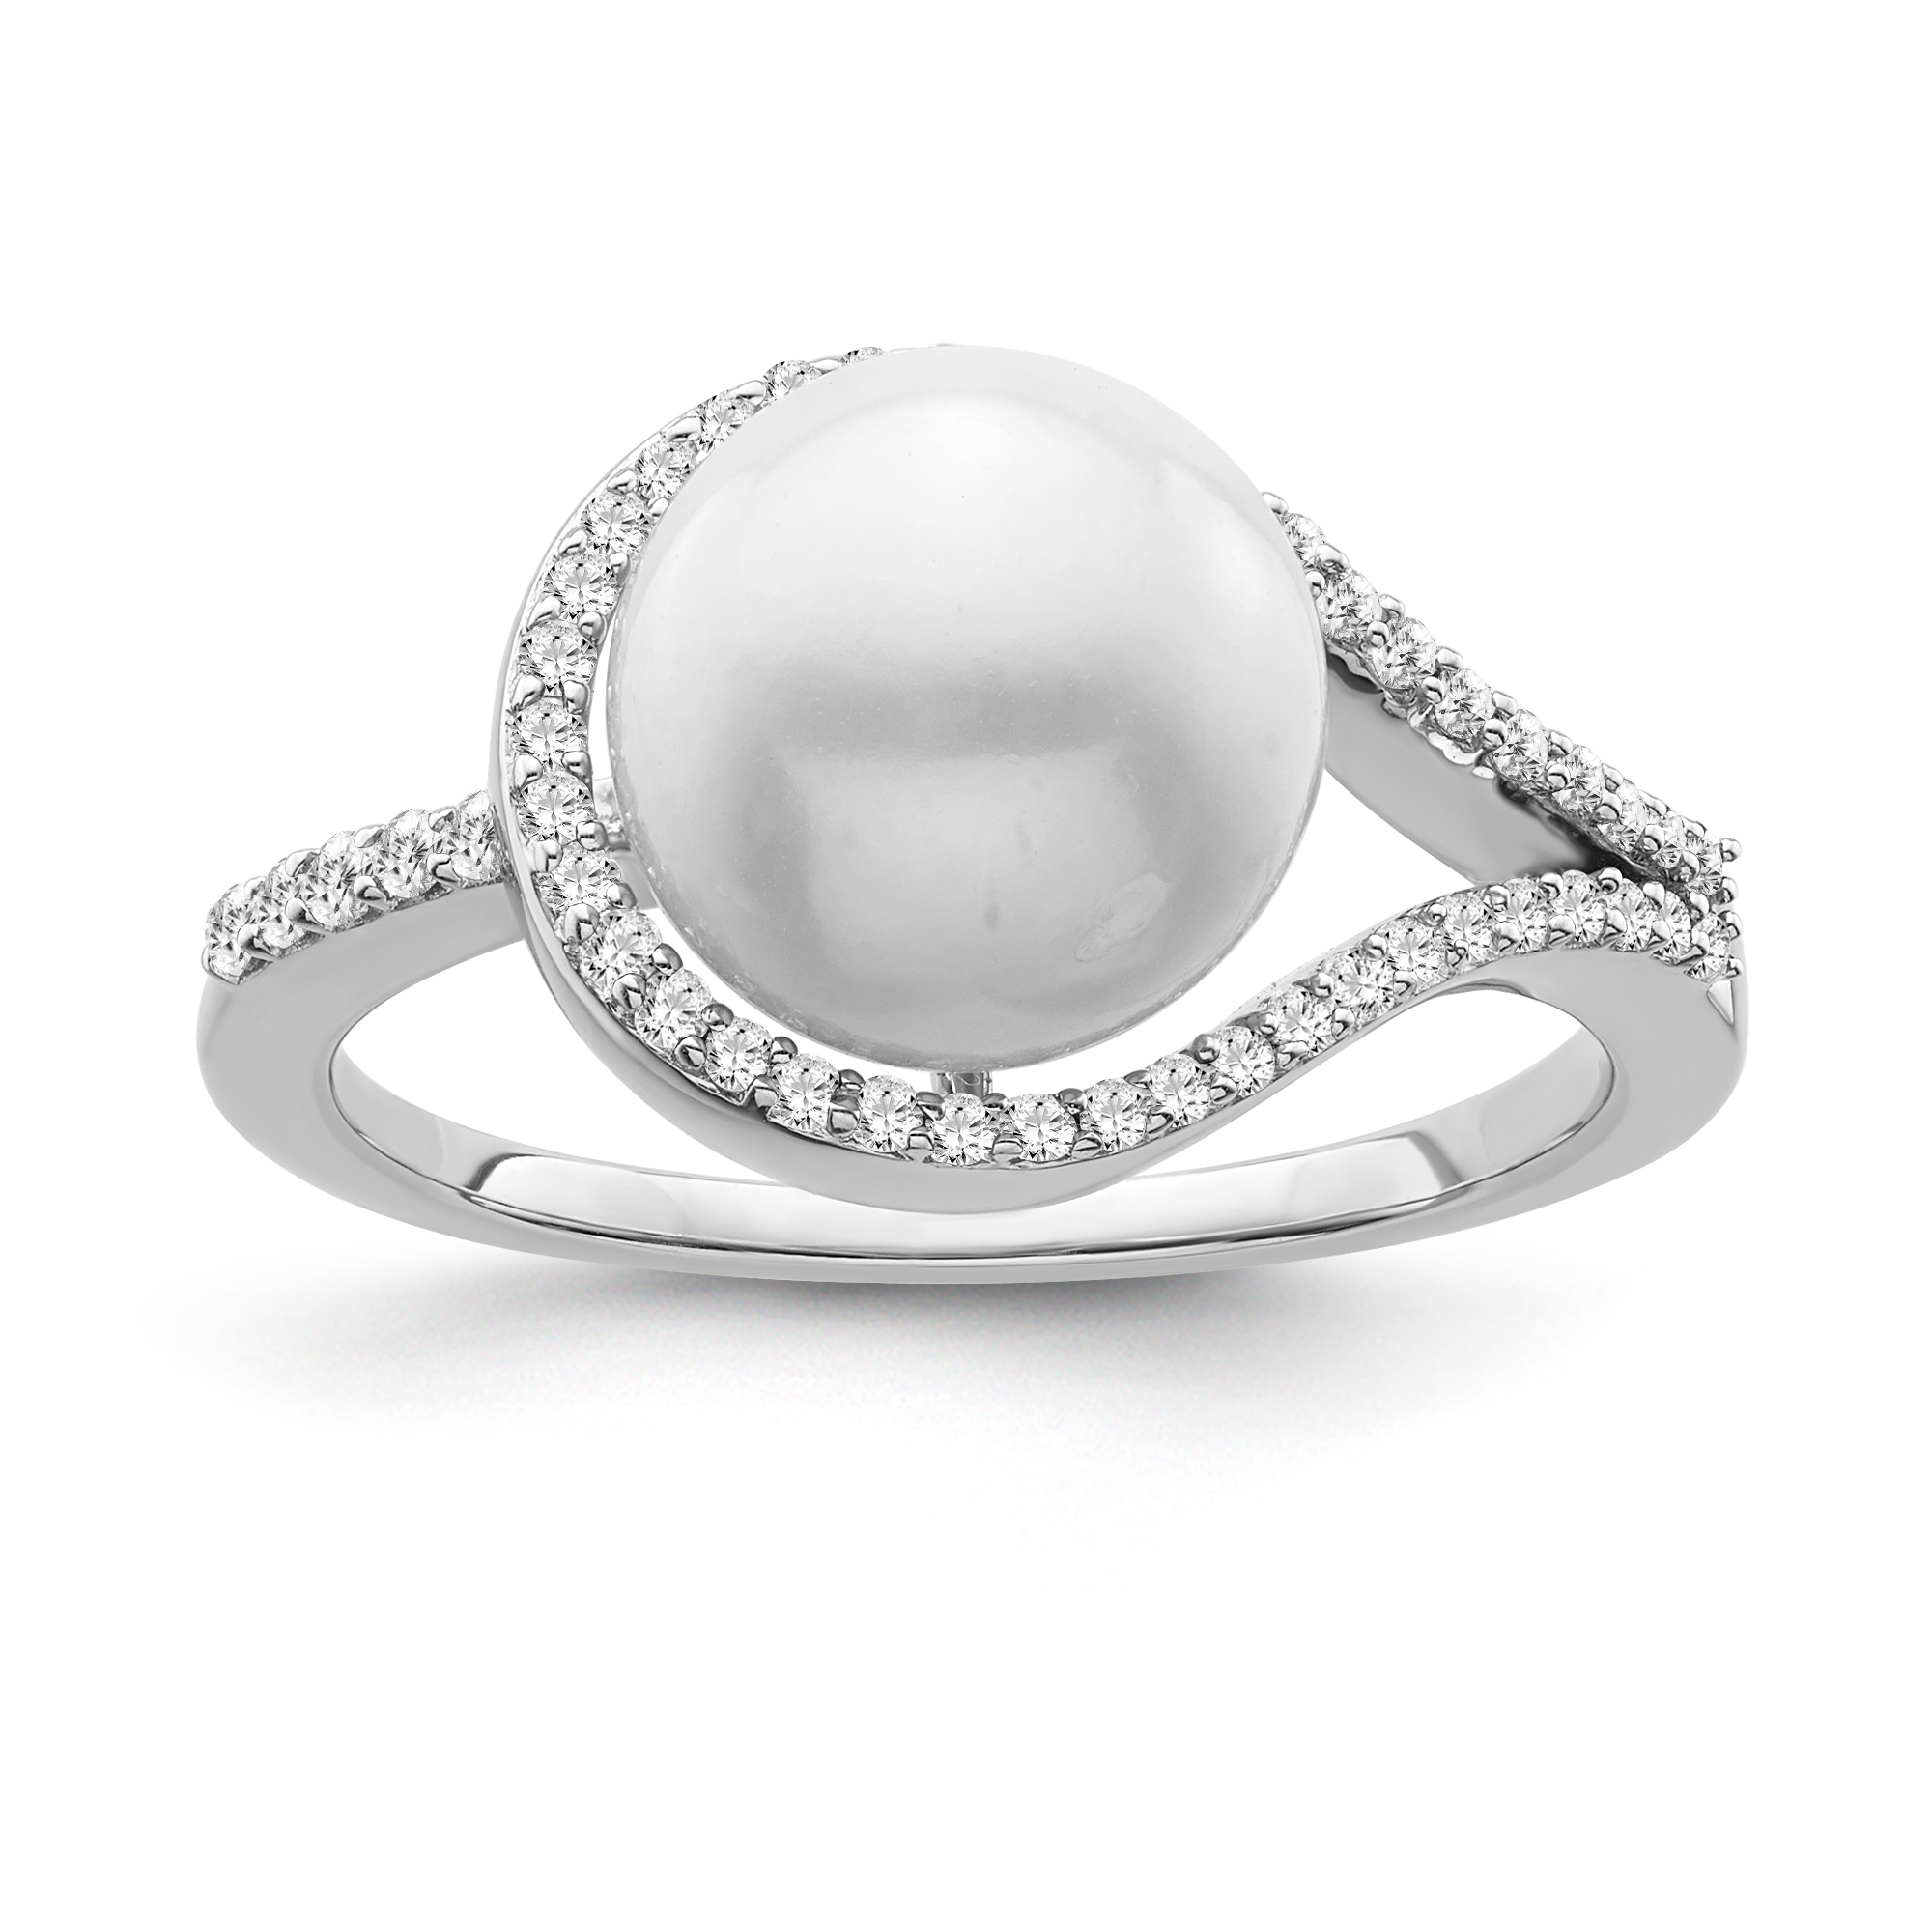 Araiya Fine Jewelry Sterling Silver Diamond and Freshwater Cultured Pearl Ring (1/5 cttw, I-J Color, I2-I3 Clarity)